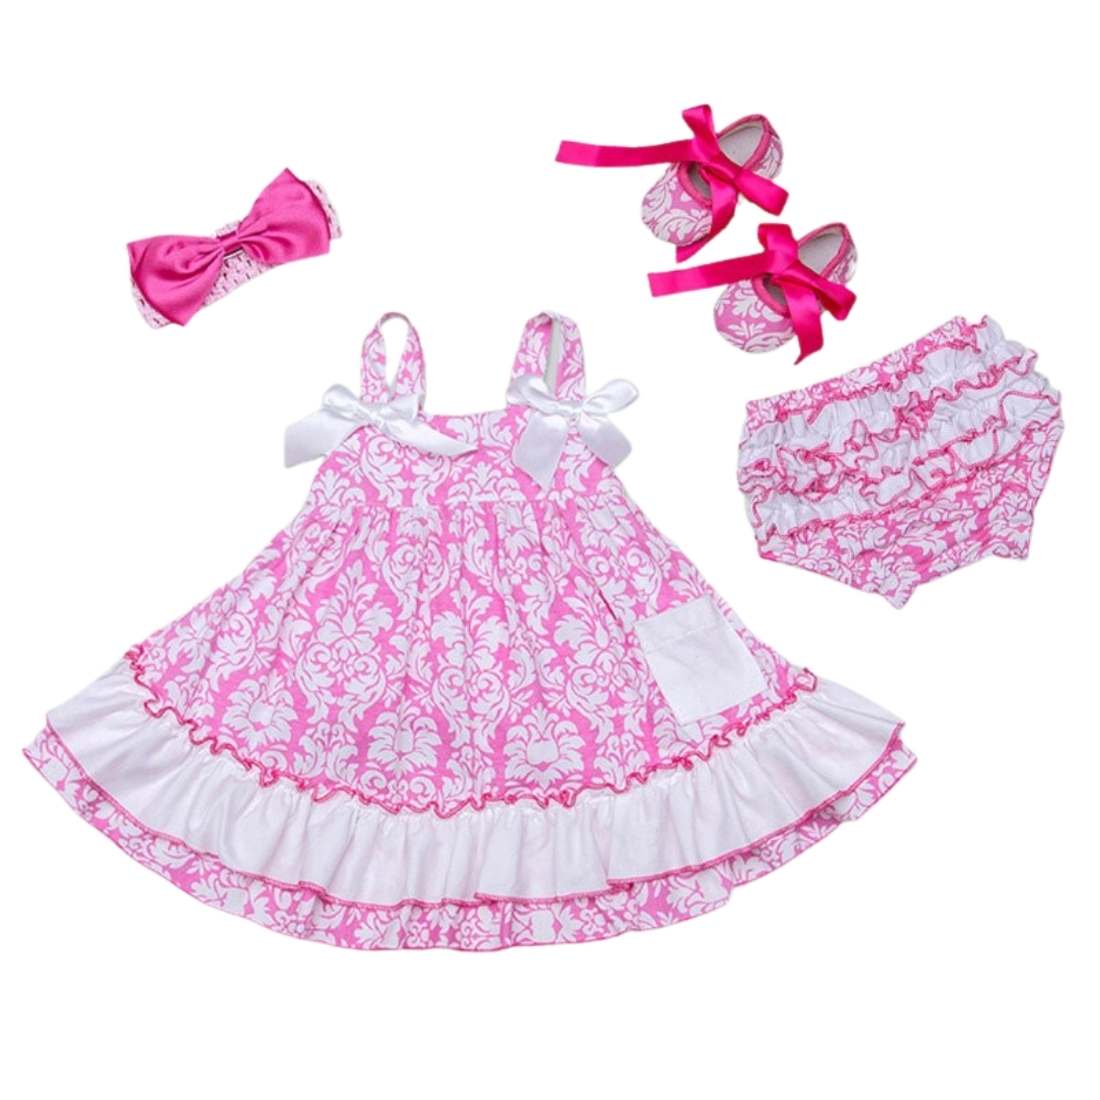 Spring/Summer Cotton Baby Set: Shorts + Headband + Bow + Shoes - Pink & Blue Baby Shop - Review